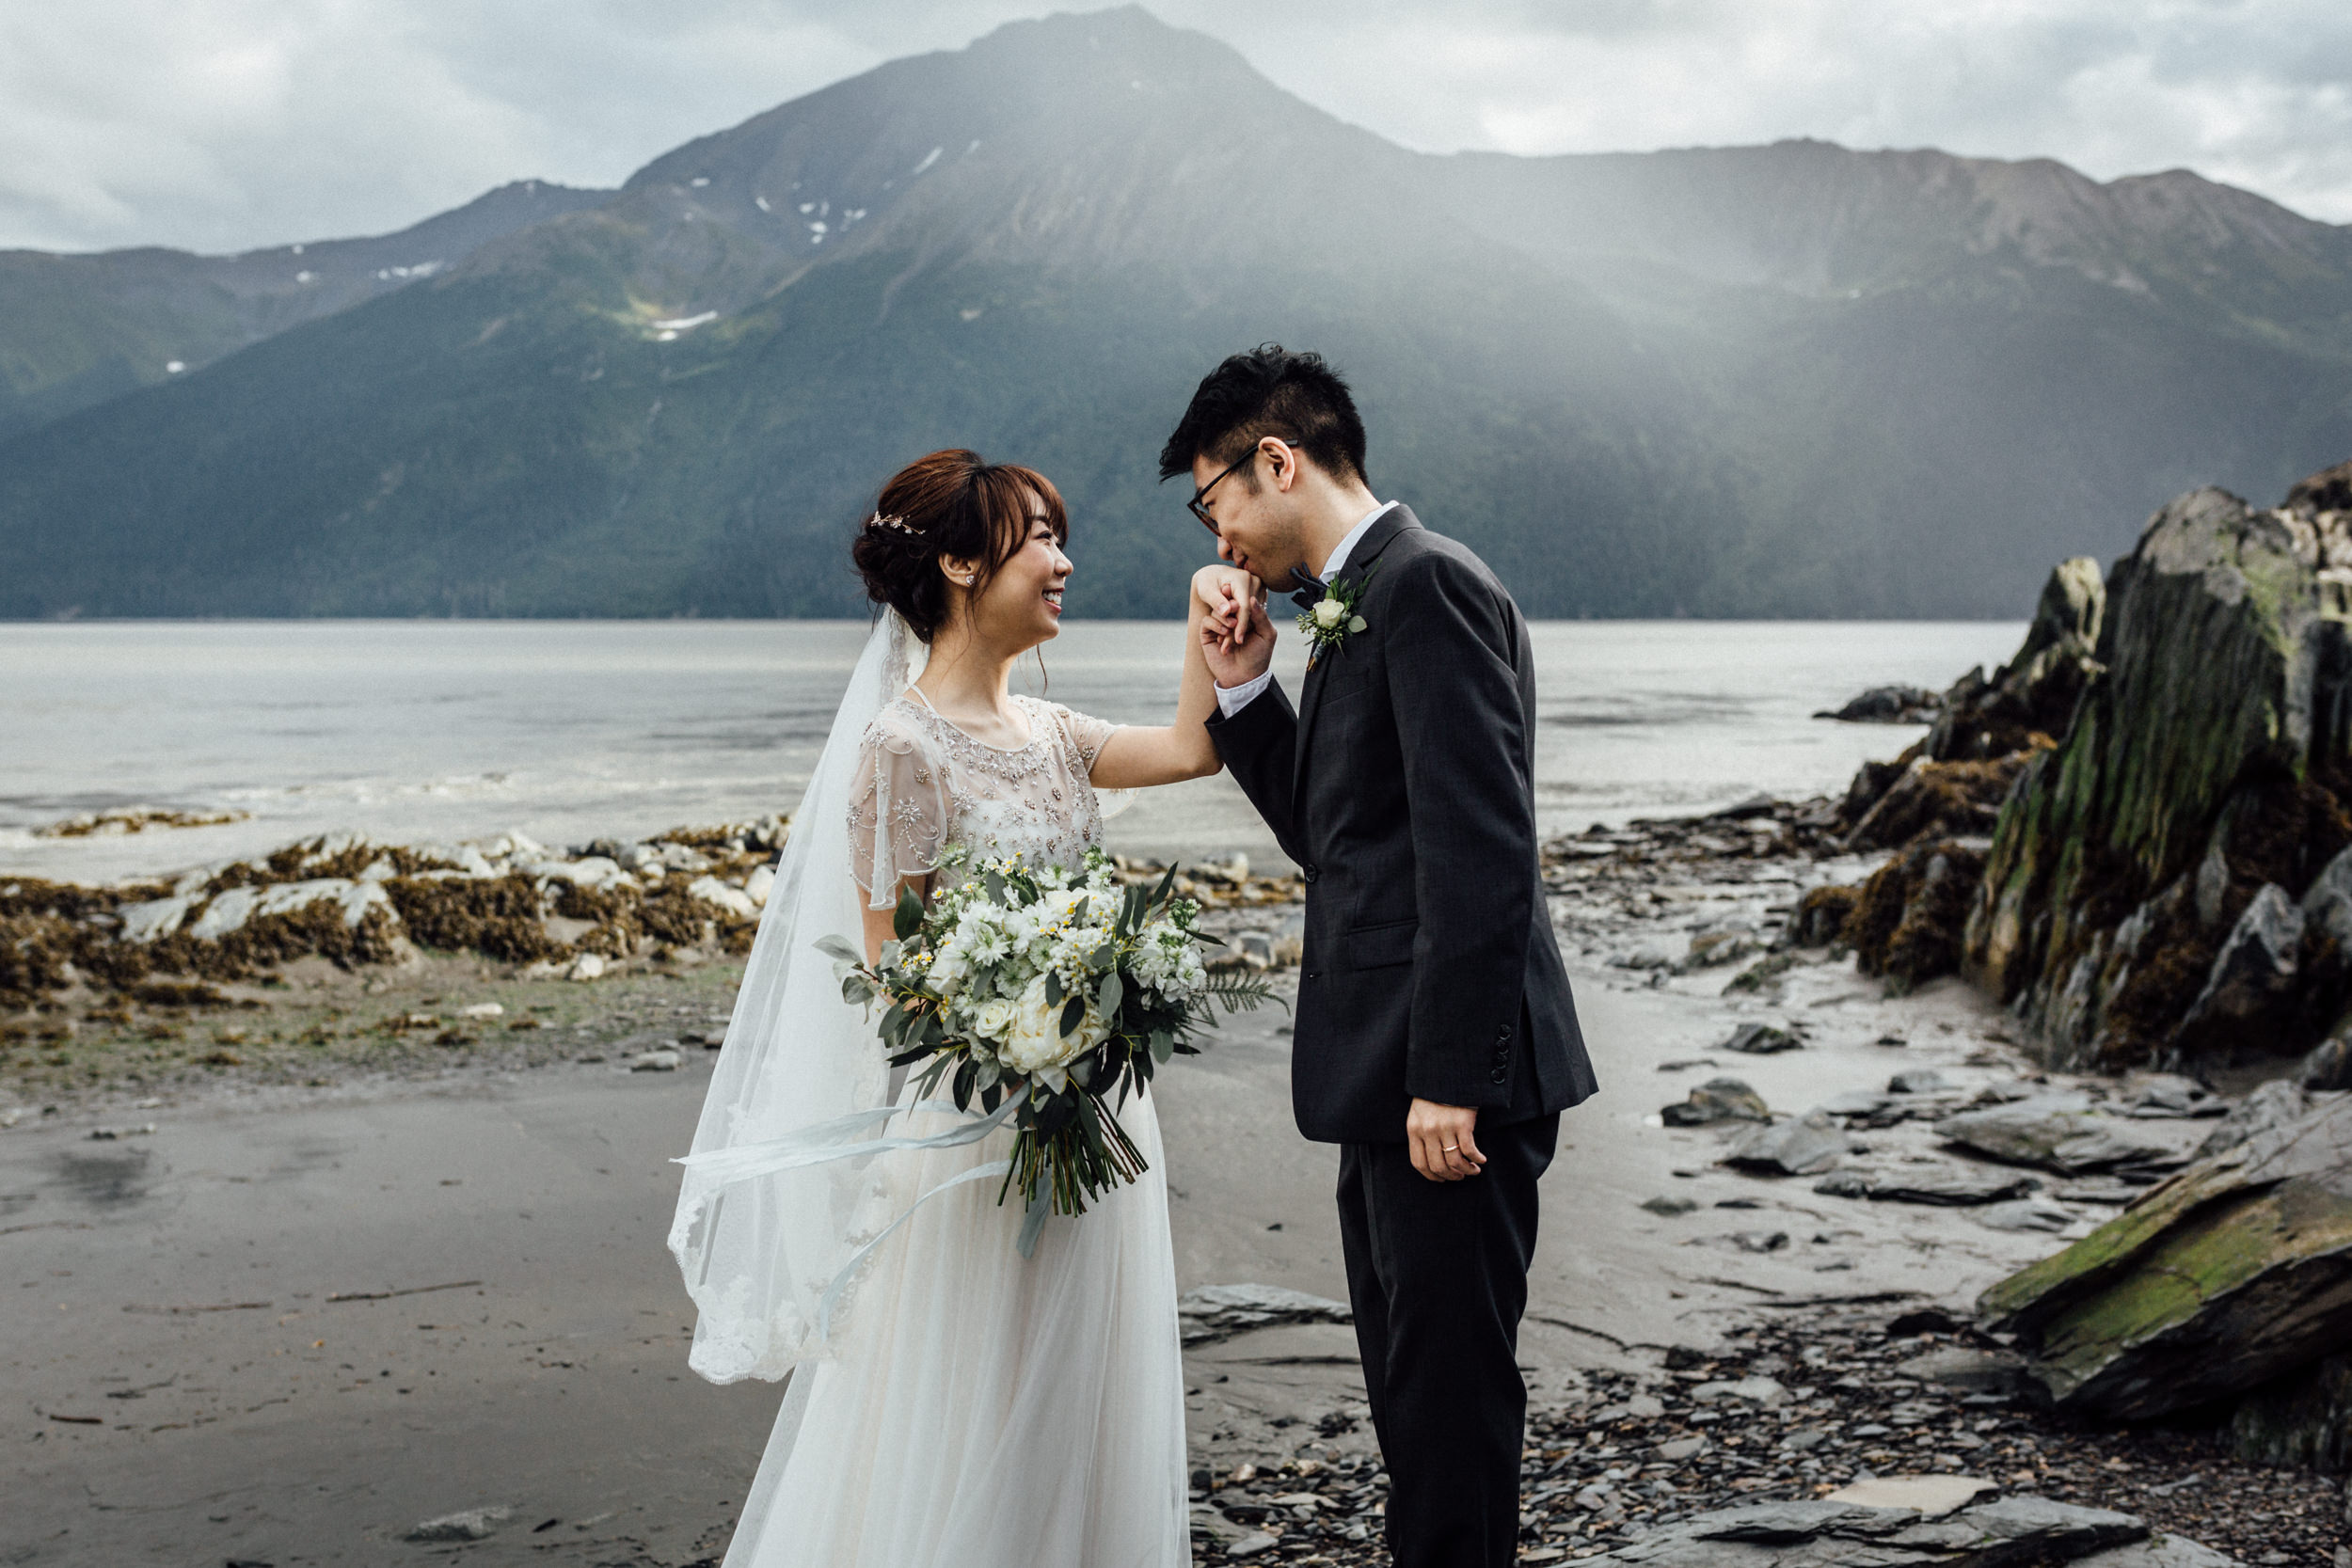 Groom kissing his bride's hand in front of misty mountains